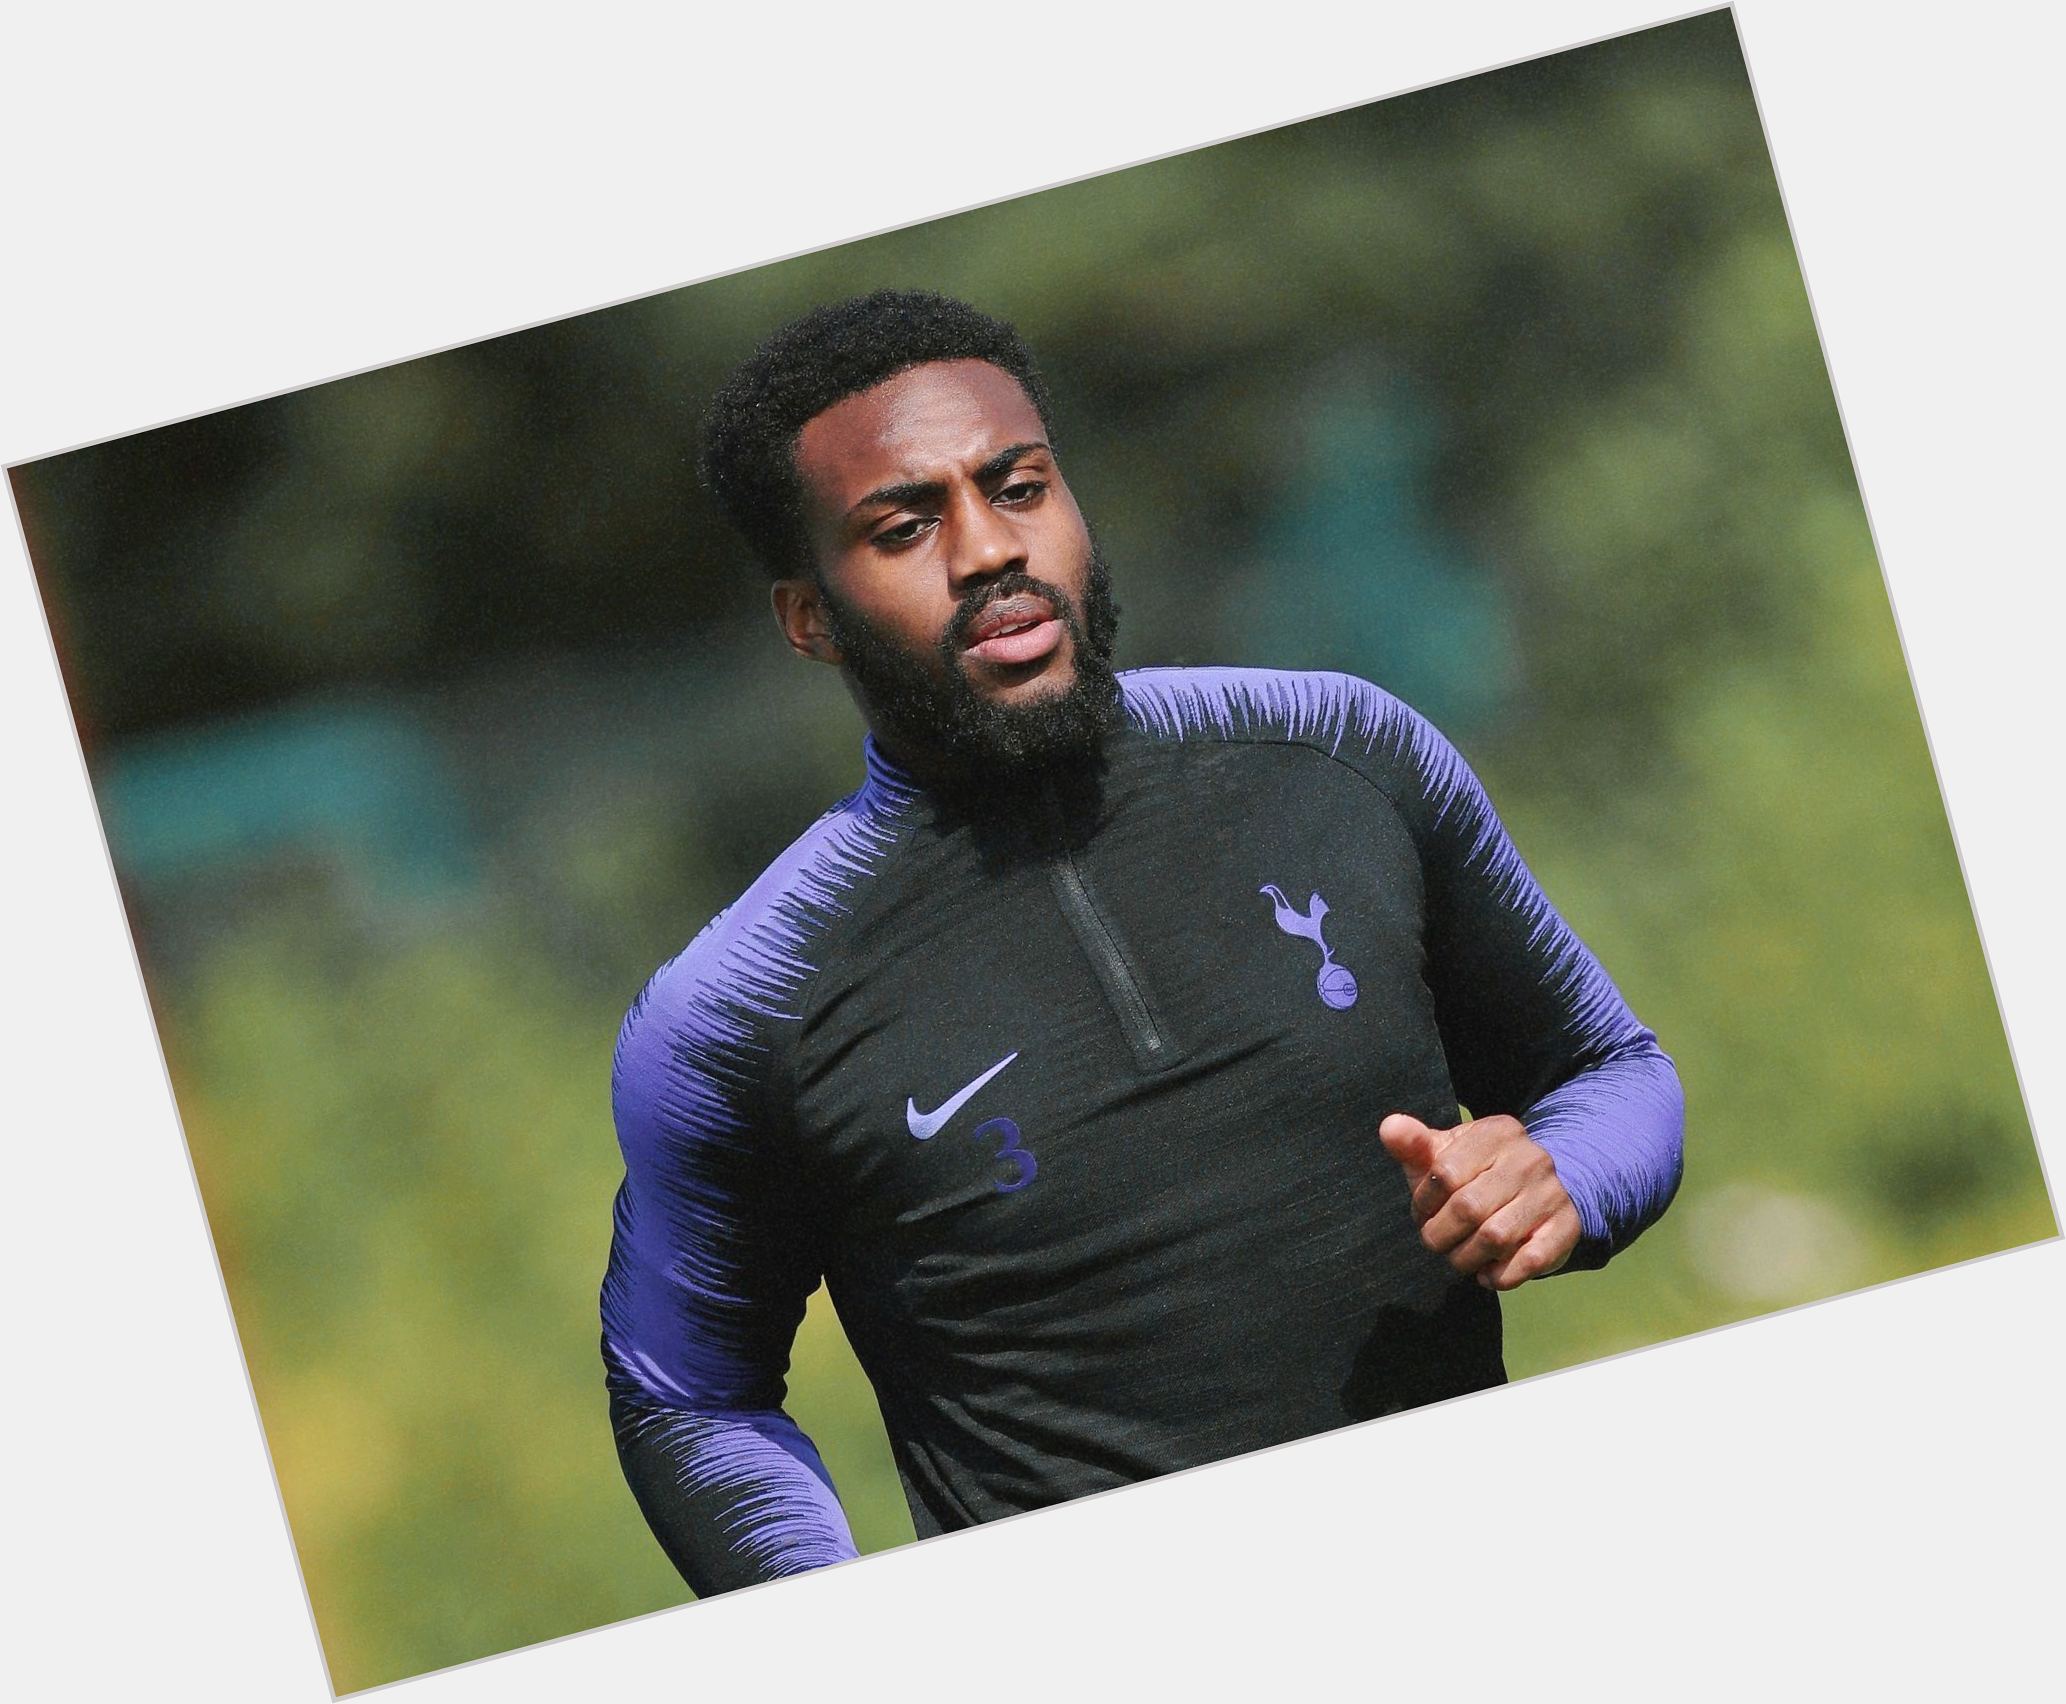 Http://fanpagepress.net/m/D/Danny Rose New Pic 1